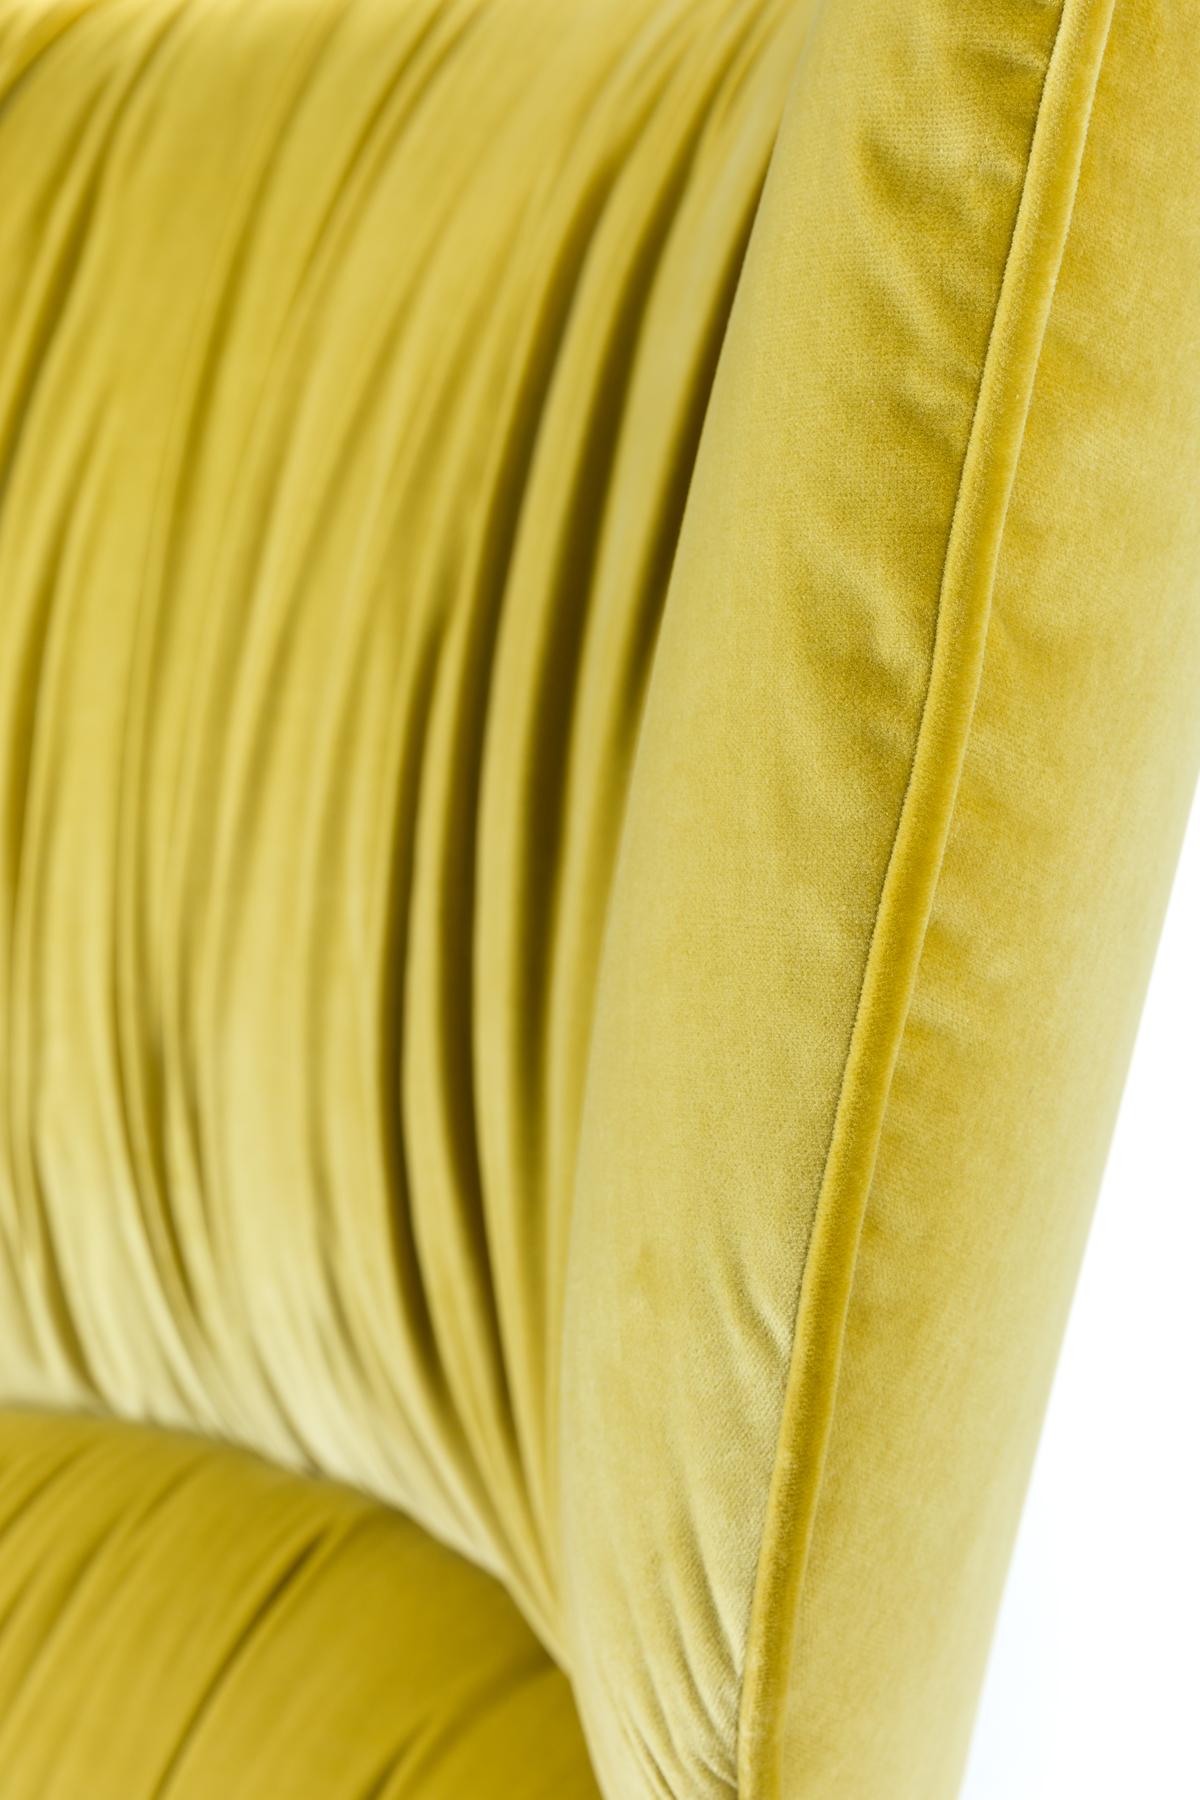 Moooi Hana Wingback Chair in Harald 3, 443 Yellow Upholstery In New Condition For Sale In Brooklyn, NY